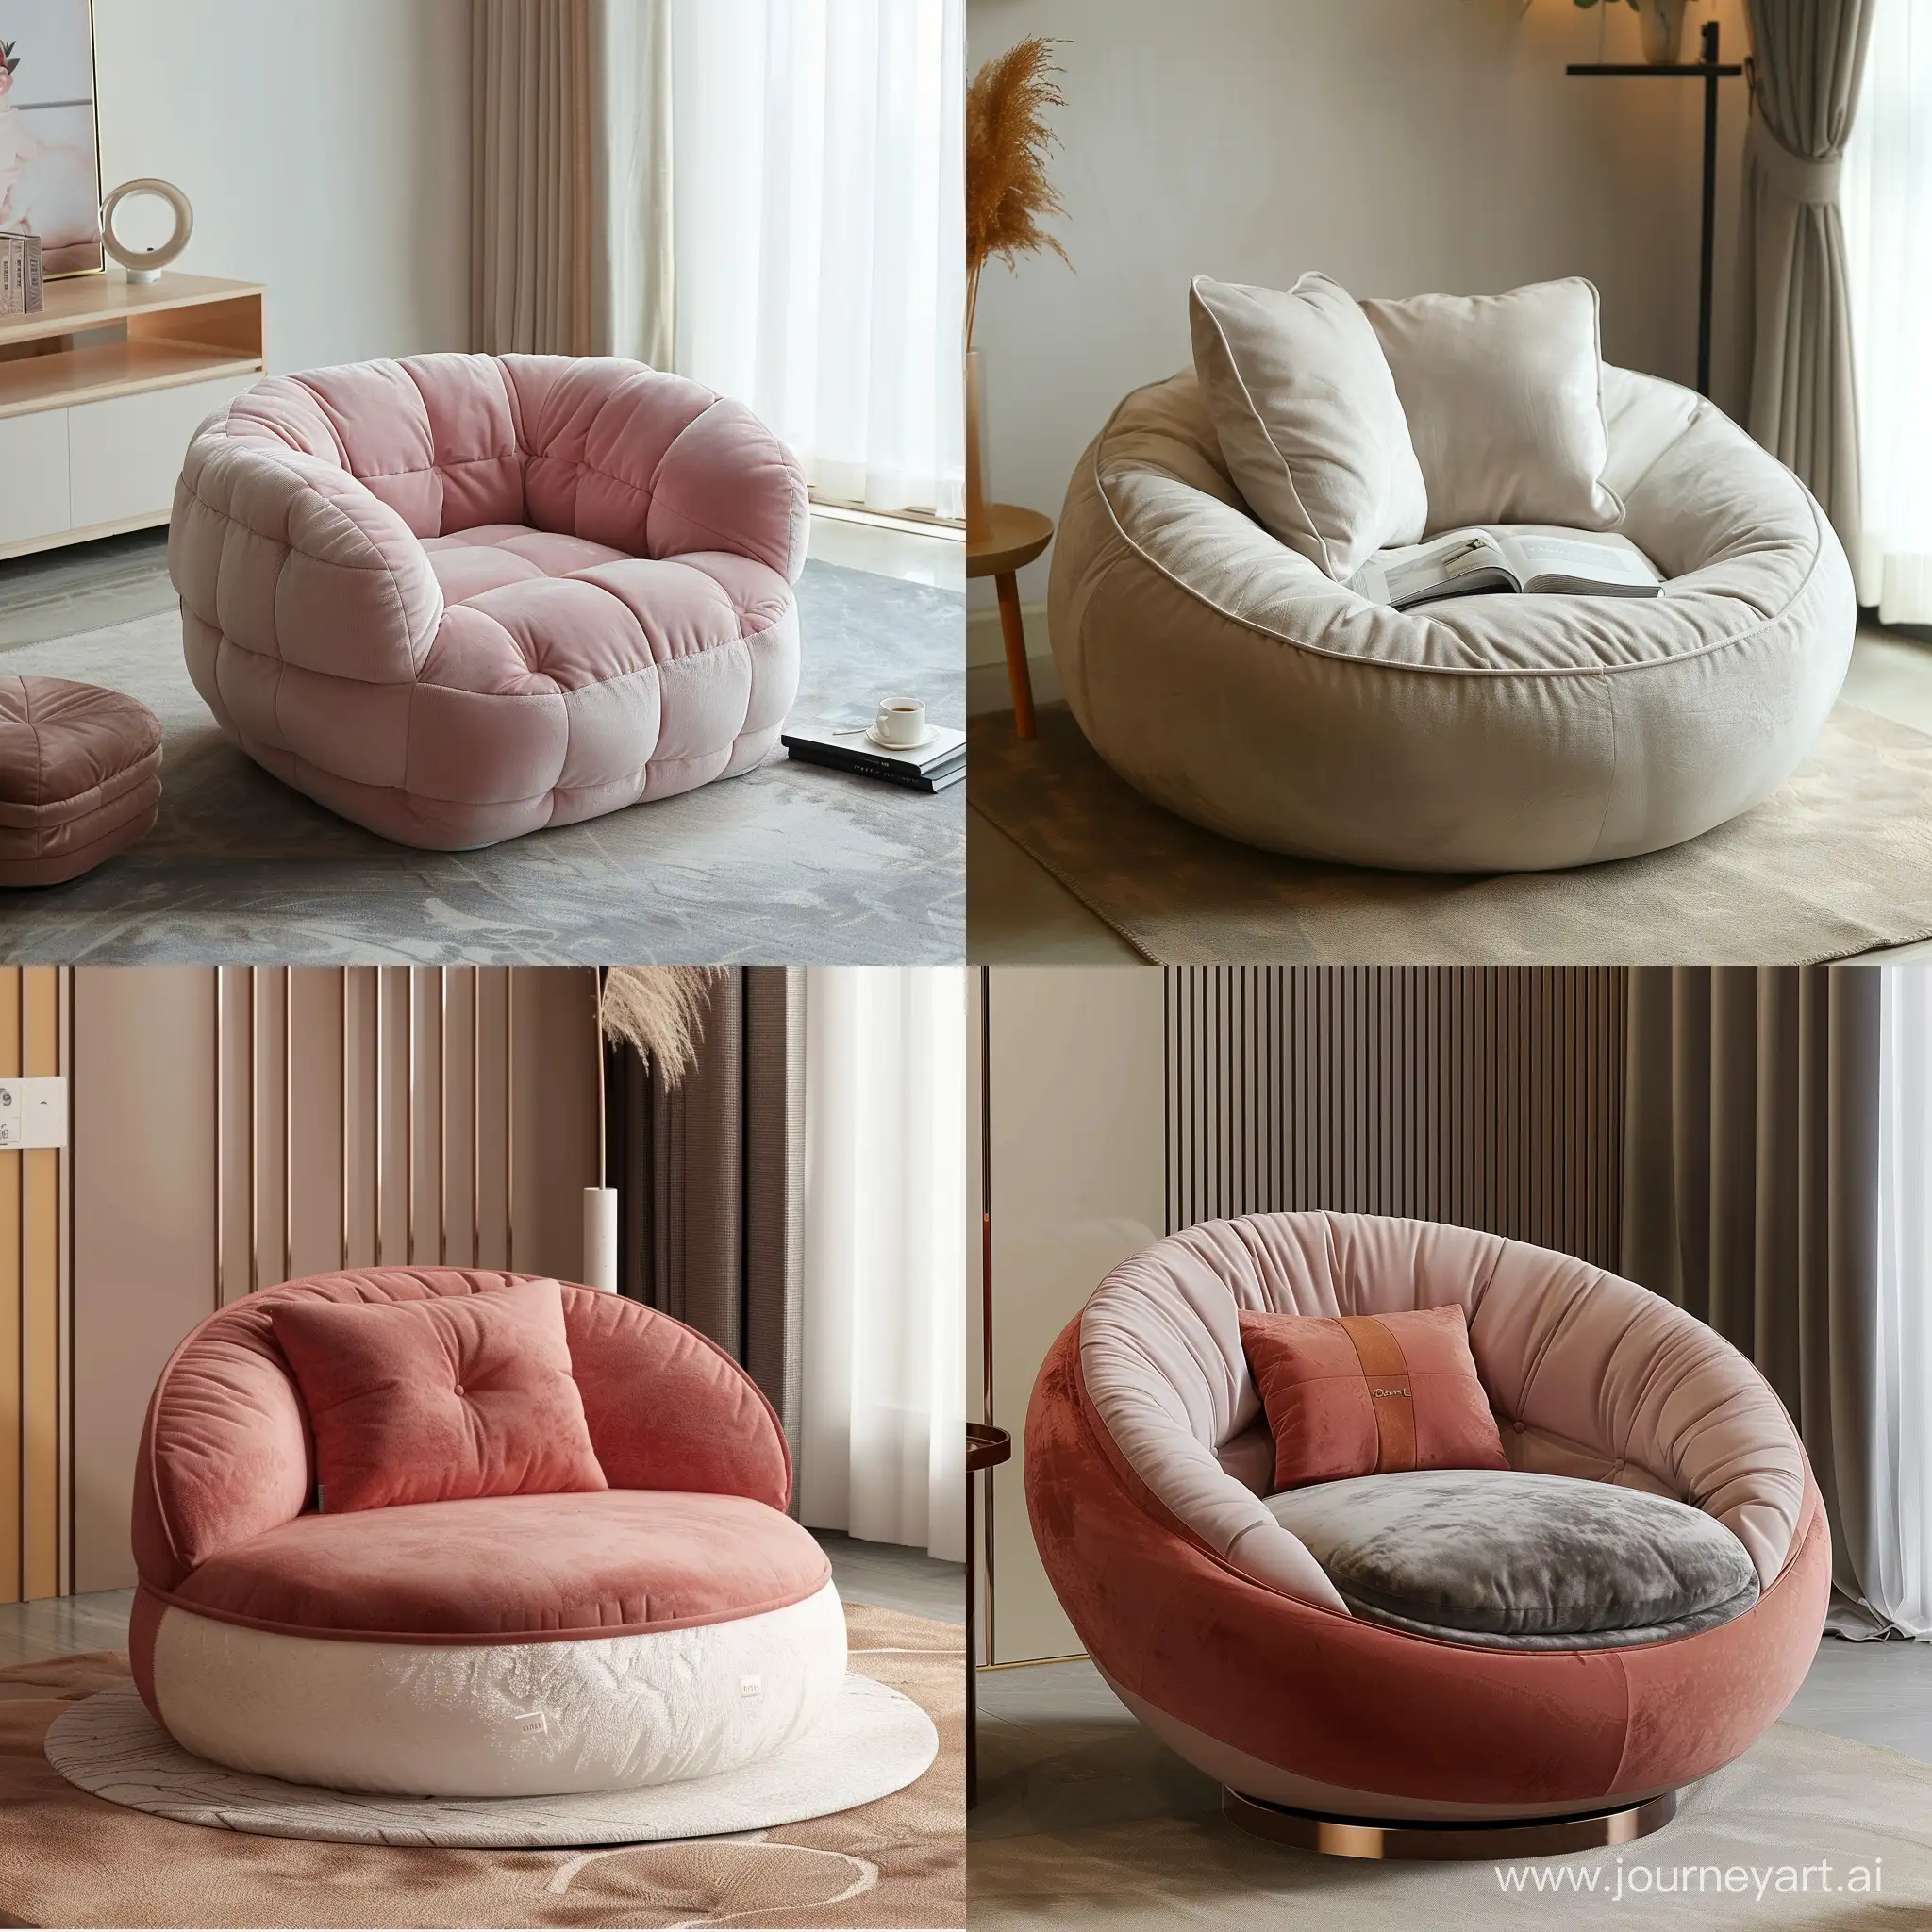 Luxurious-Round-Lazy-Chair-in-Cute-Style